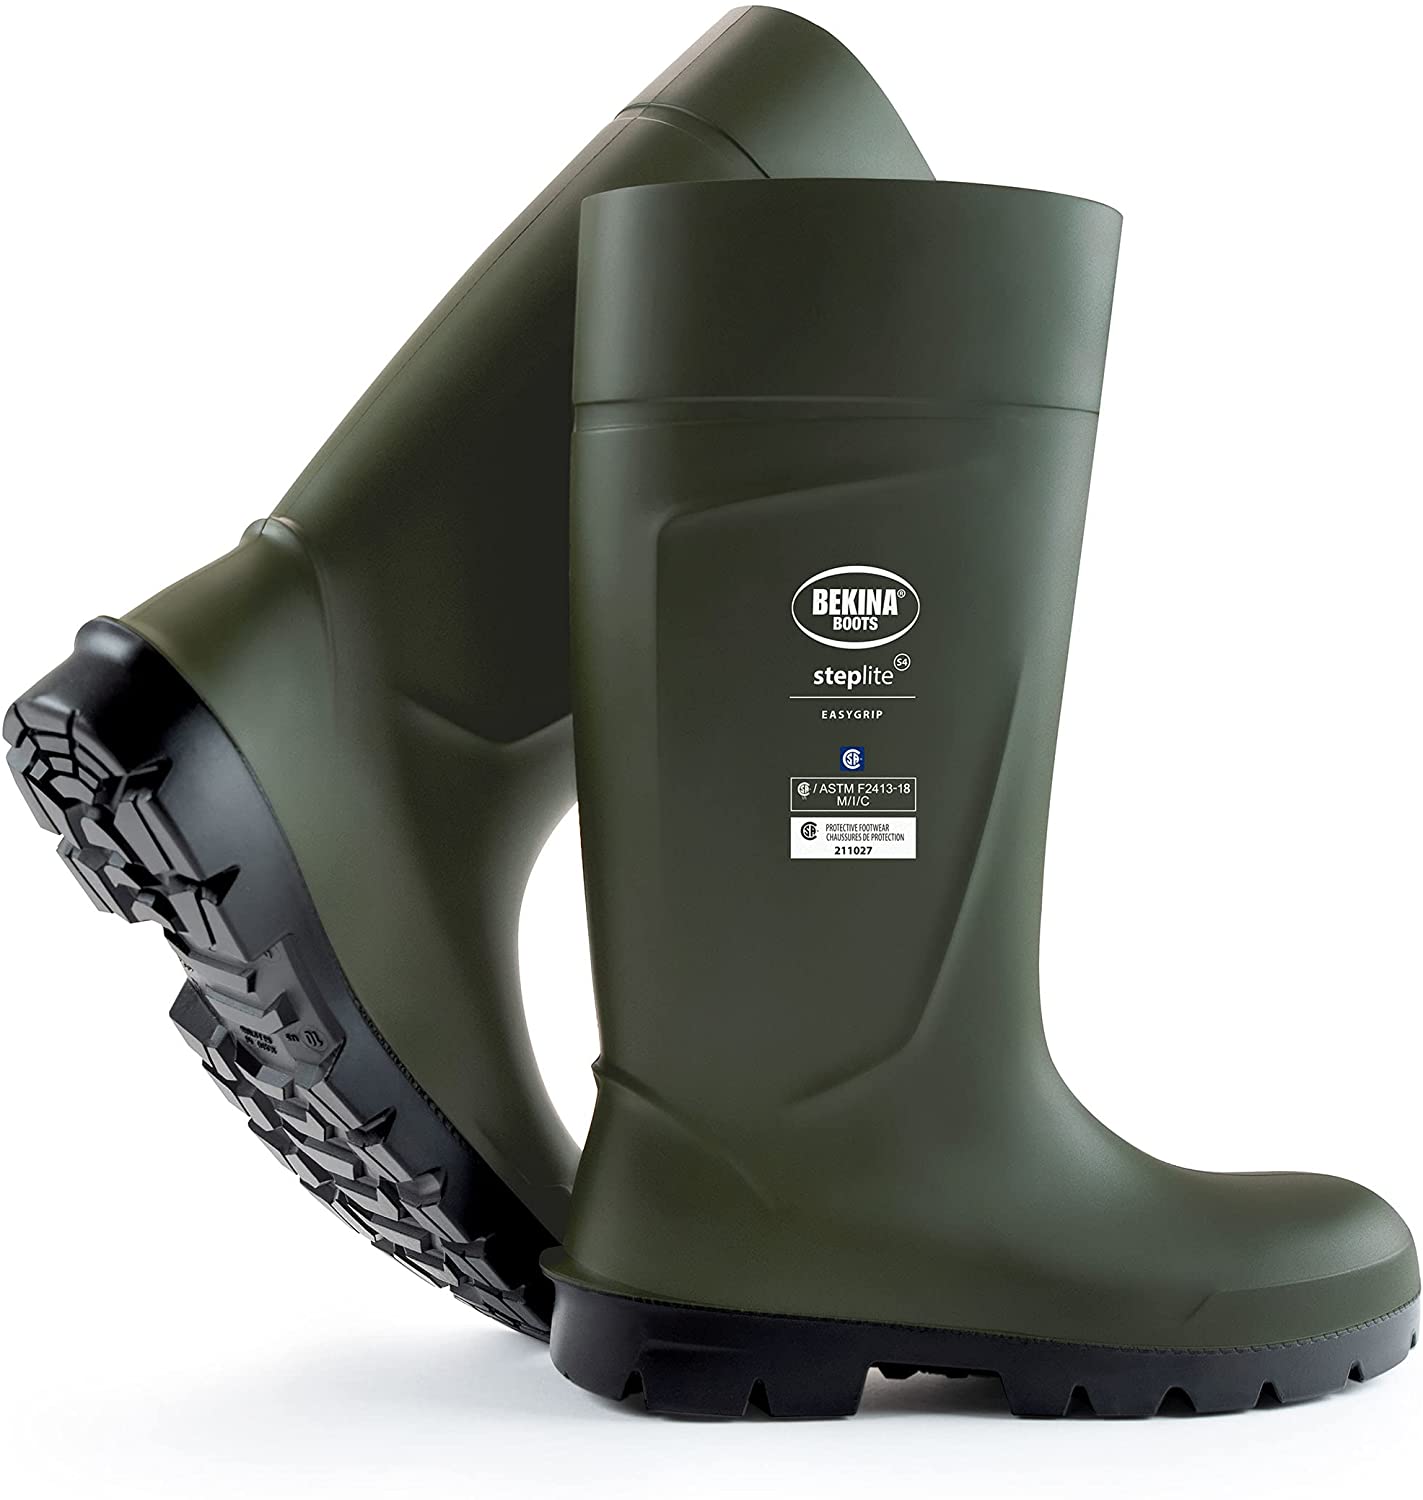 Steplite Easygrip S4 Metal Safety Toe Cap Work Boots in Green/Black from the side view